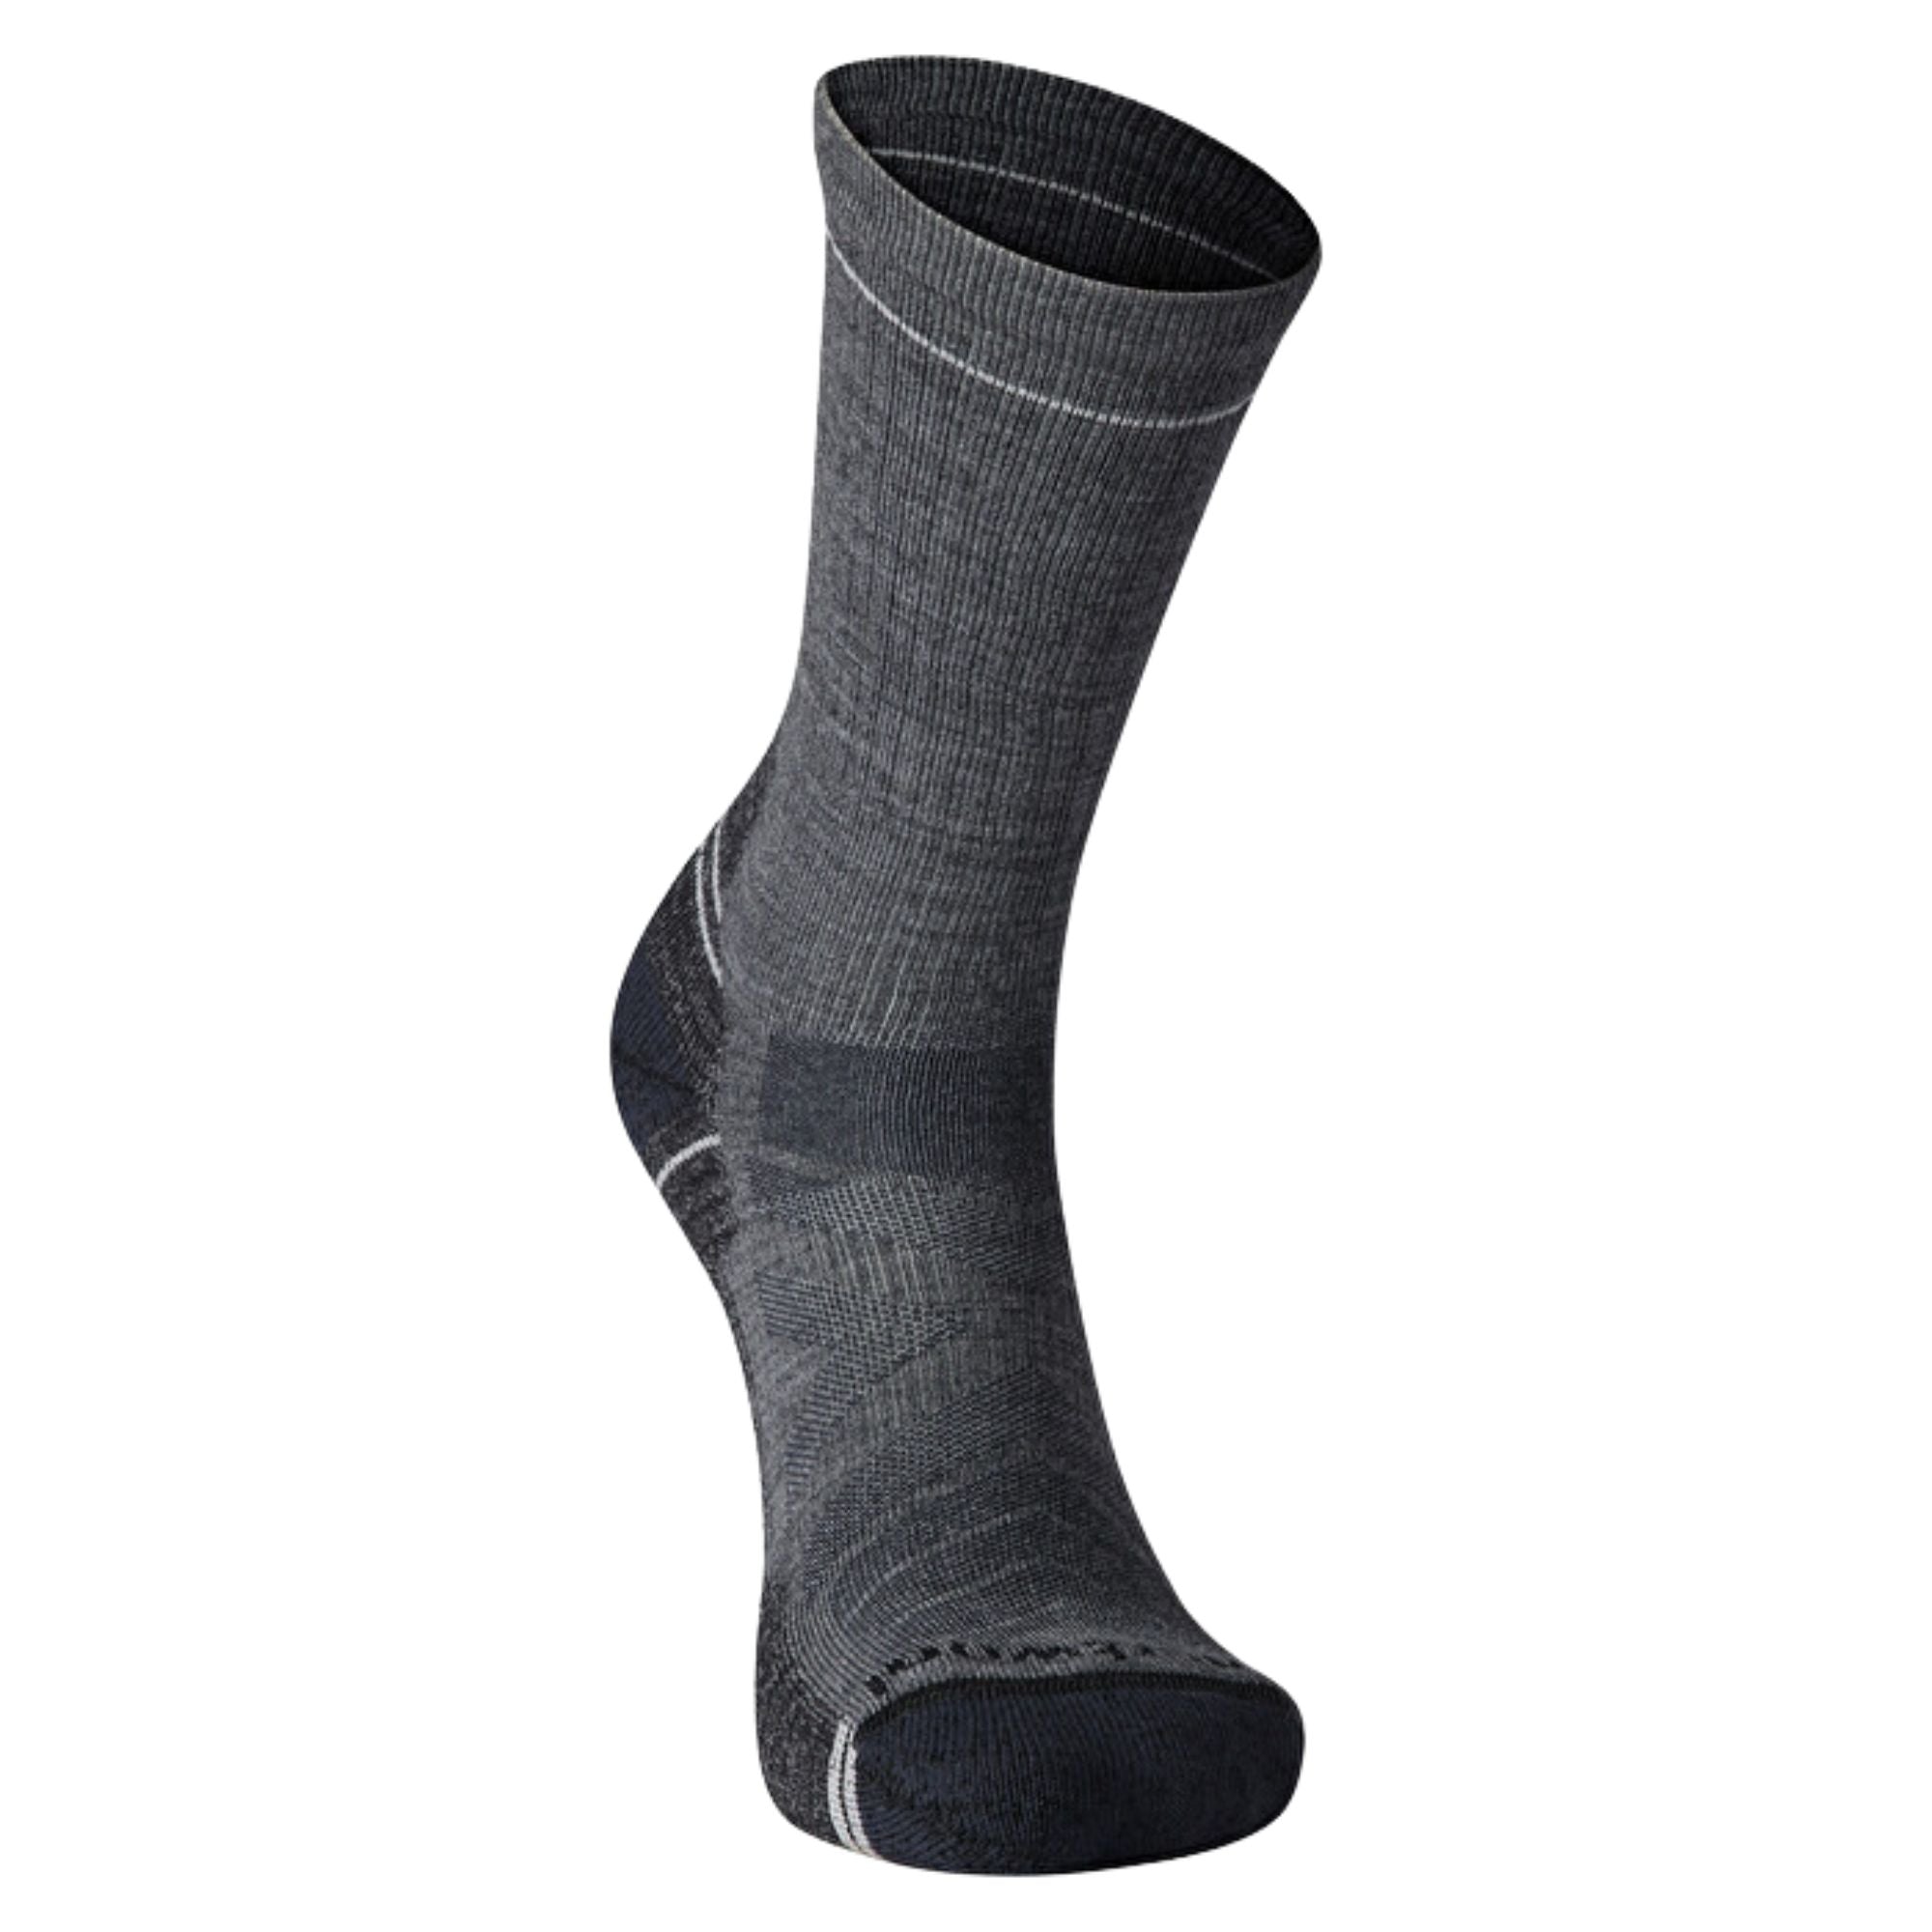 Smartwool Hike Light Cushion Crew Socks | SMARTWOOL | Portwest - The Outdoor Shop